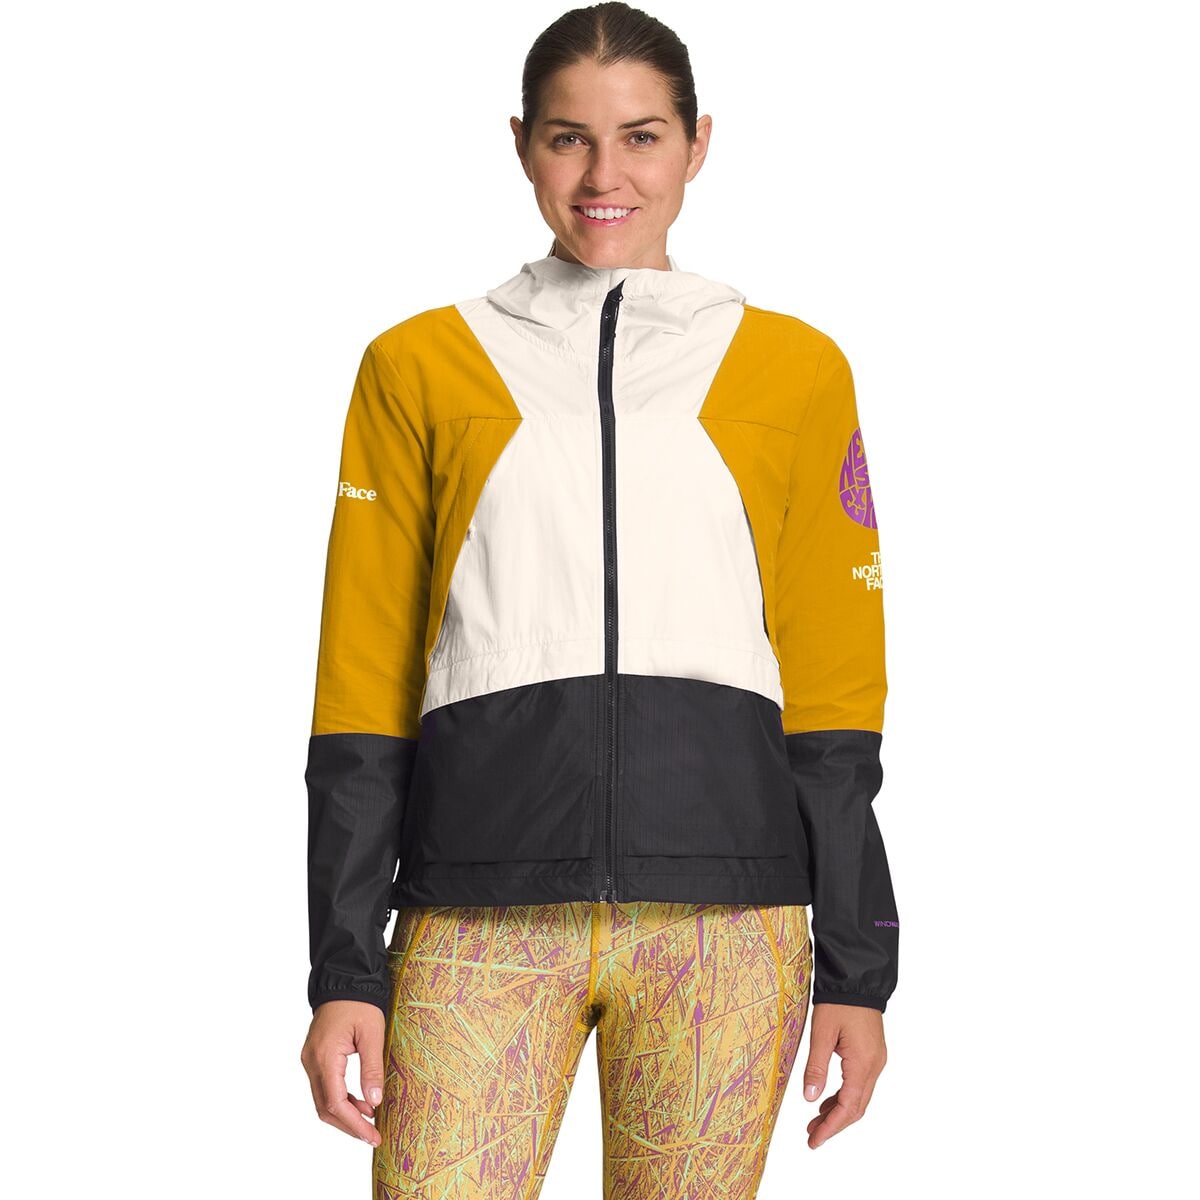 Margaret Mitchell junk Cape The North Face Trailwear Wind Whistle Jacket - Women's - Clothing